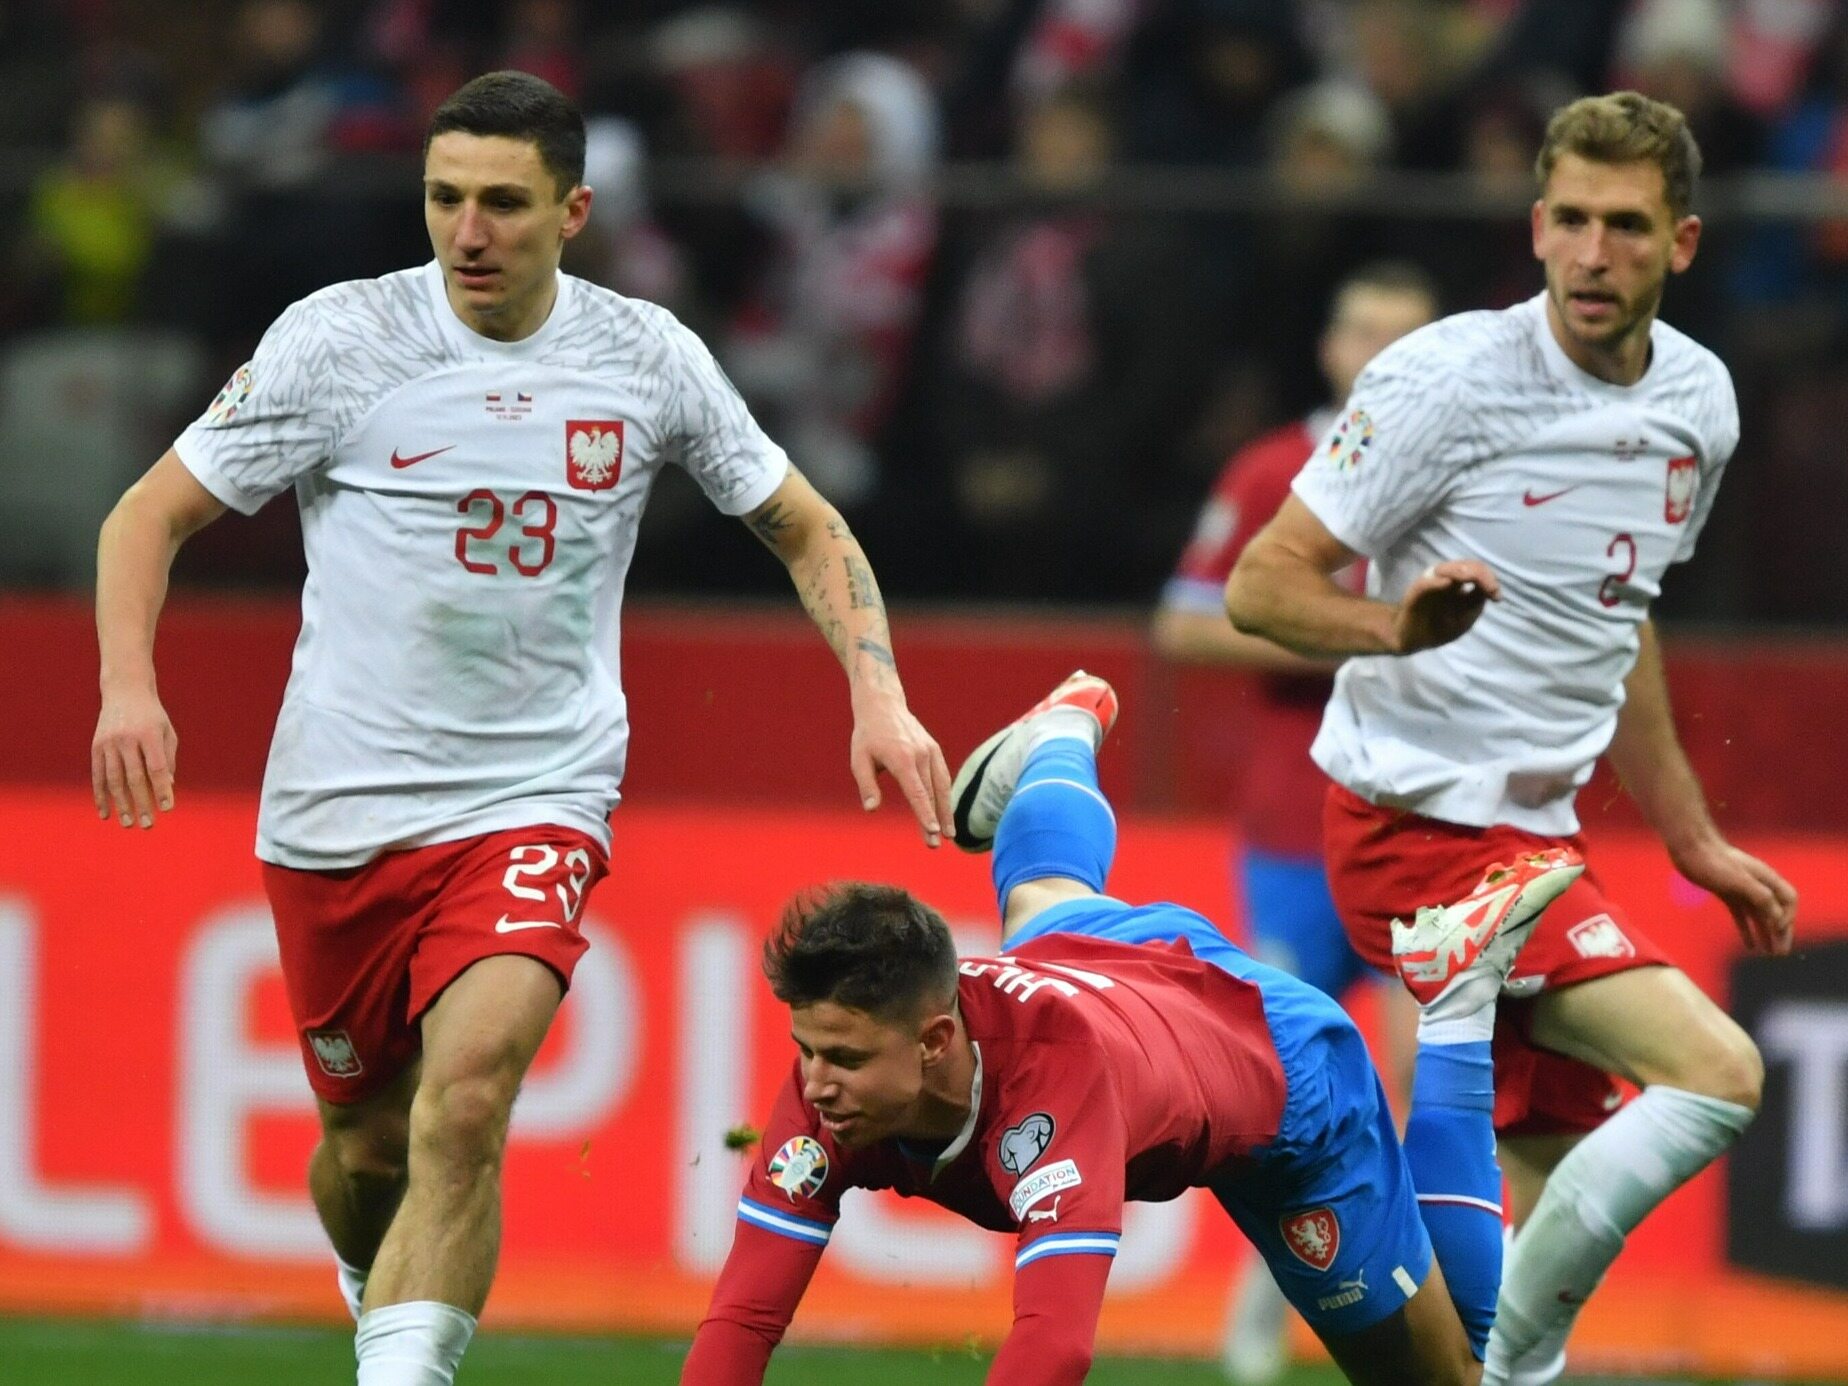 The Poles did not complete the task in the match against the Czech Republic.  Direct promotion to the Euro is impossible